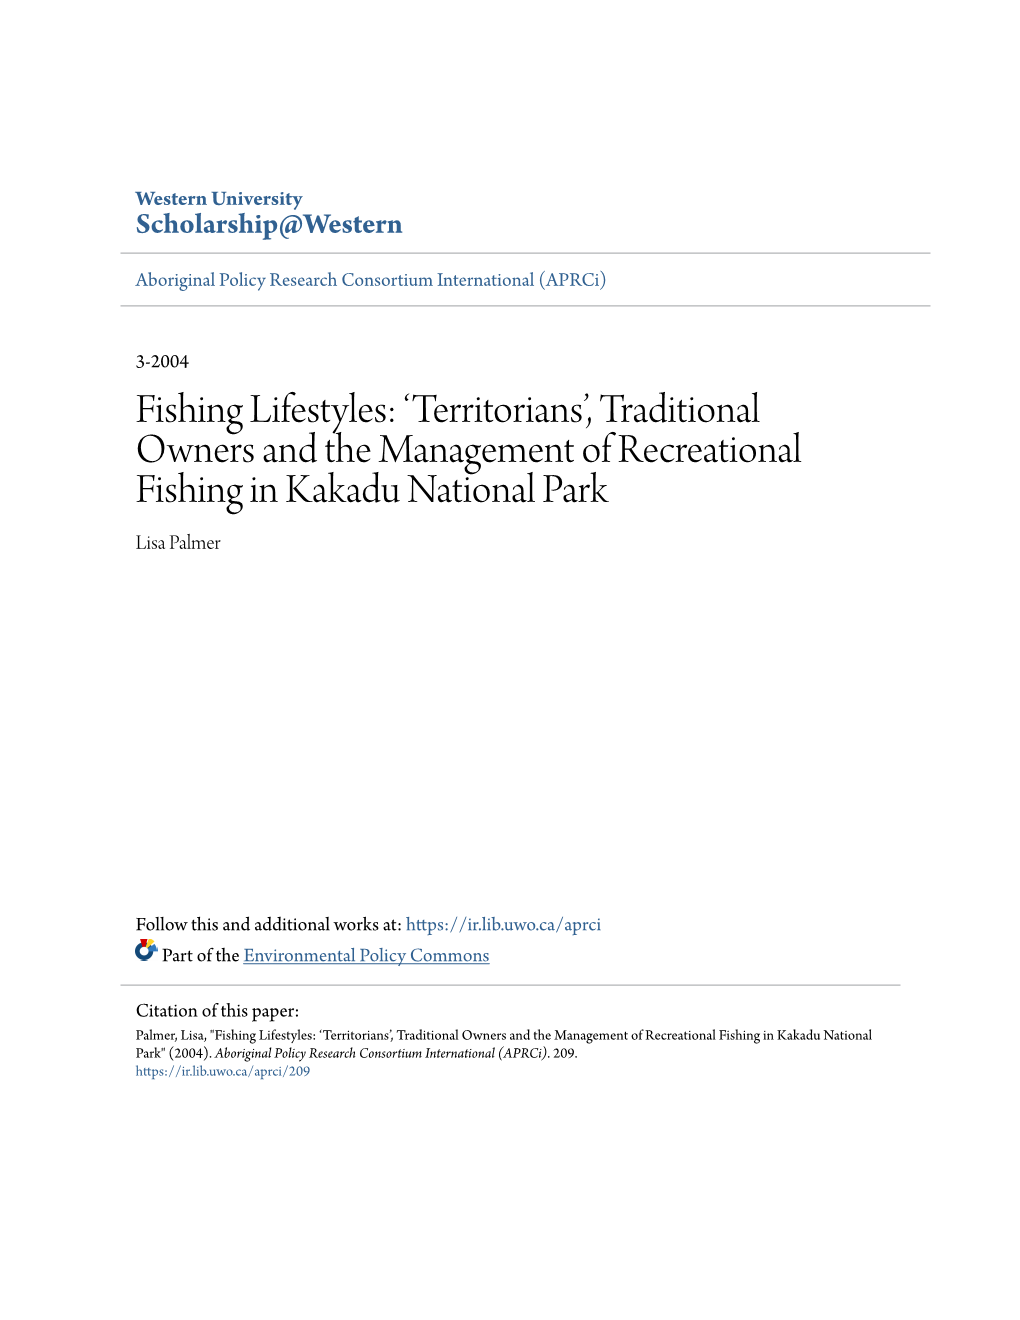 Traditional Owners and the Management of Recreational Fishing in Kakadu National Park Lisa Palmer